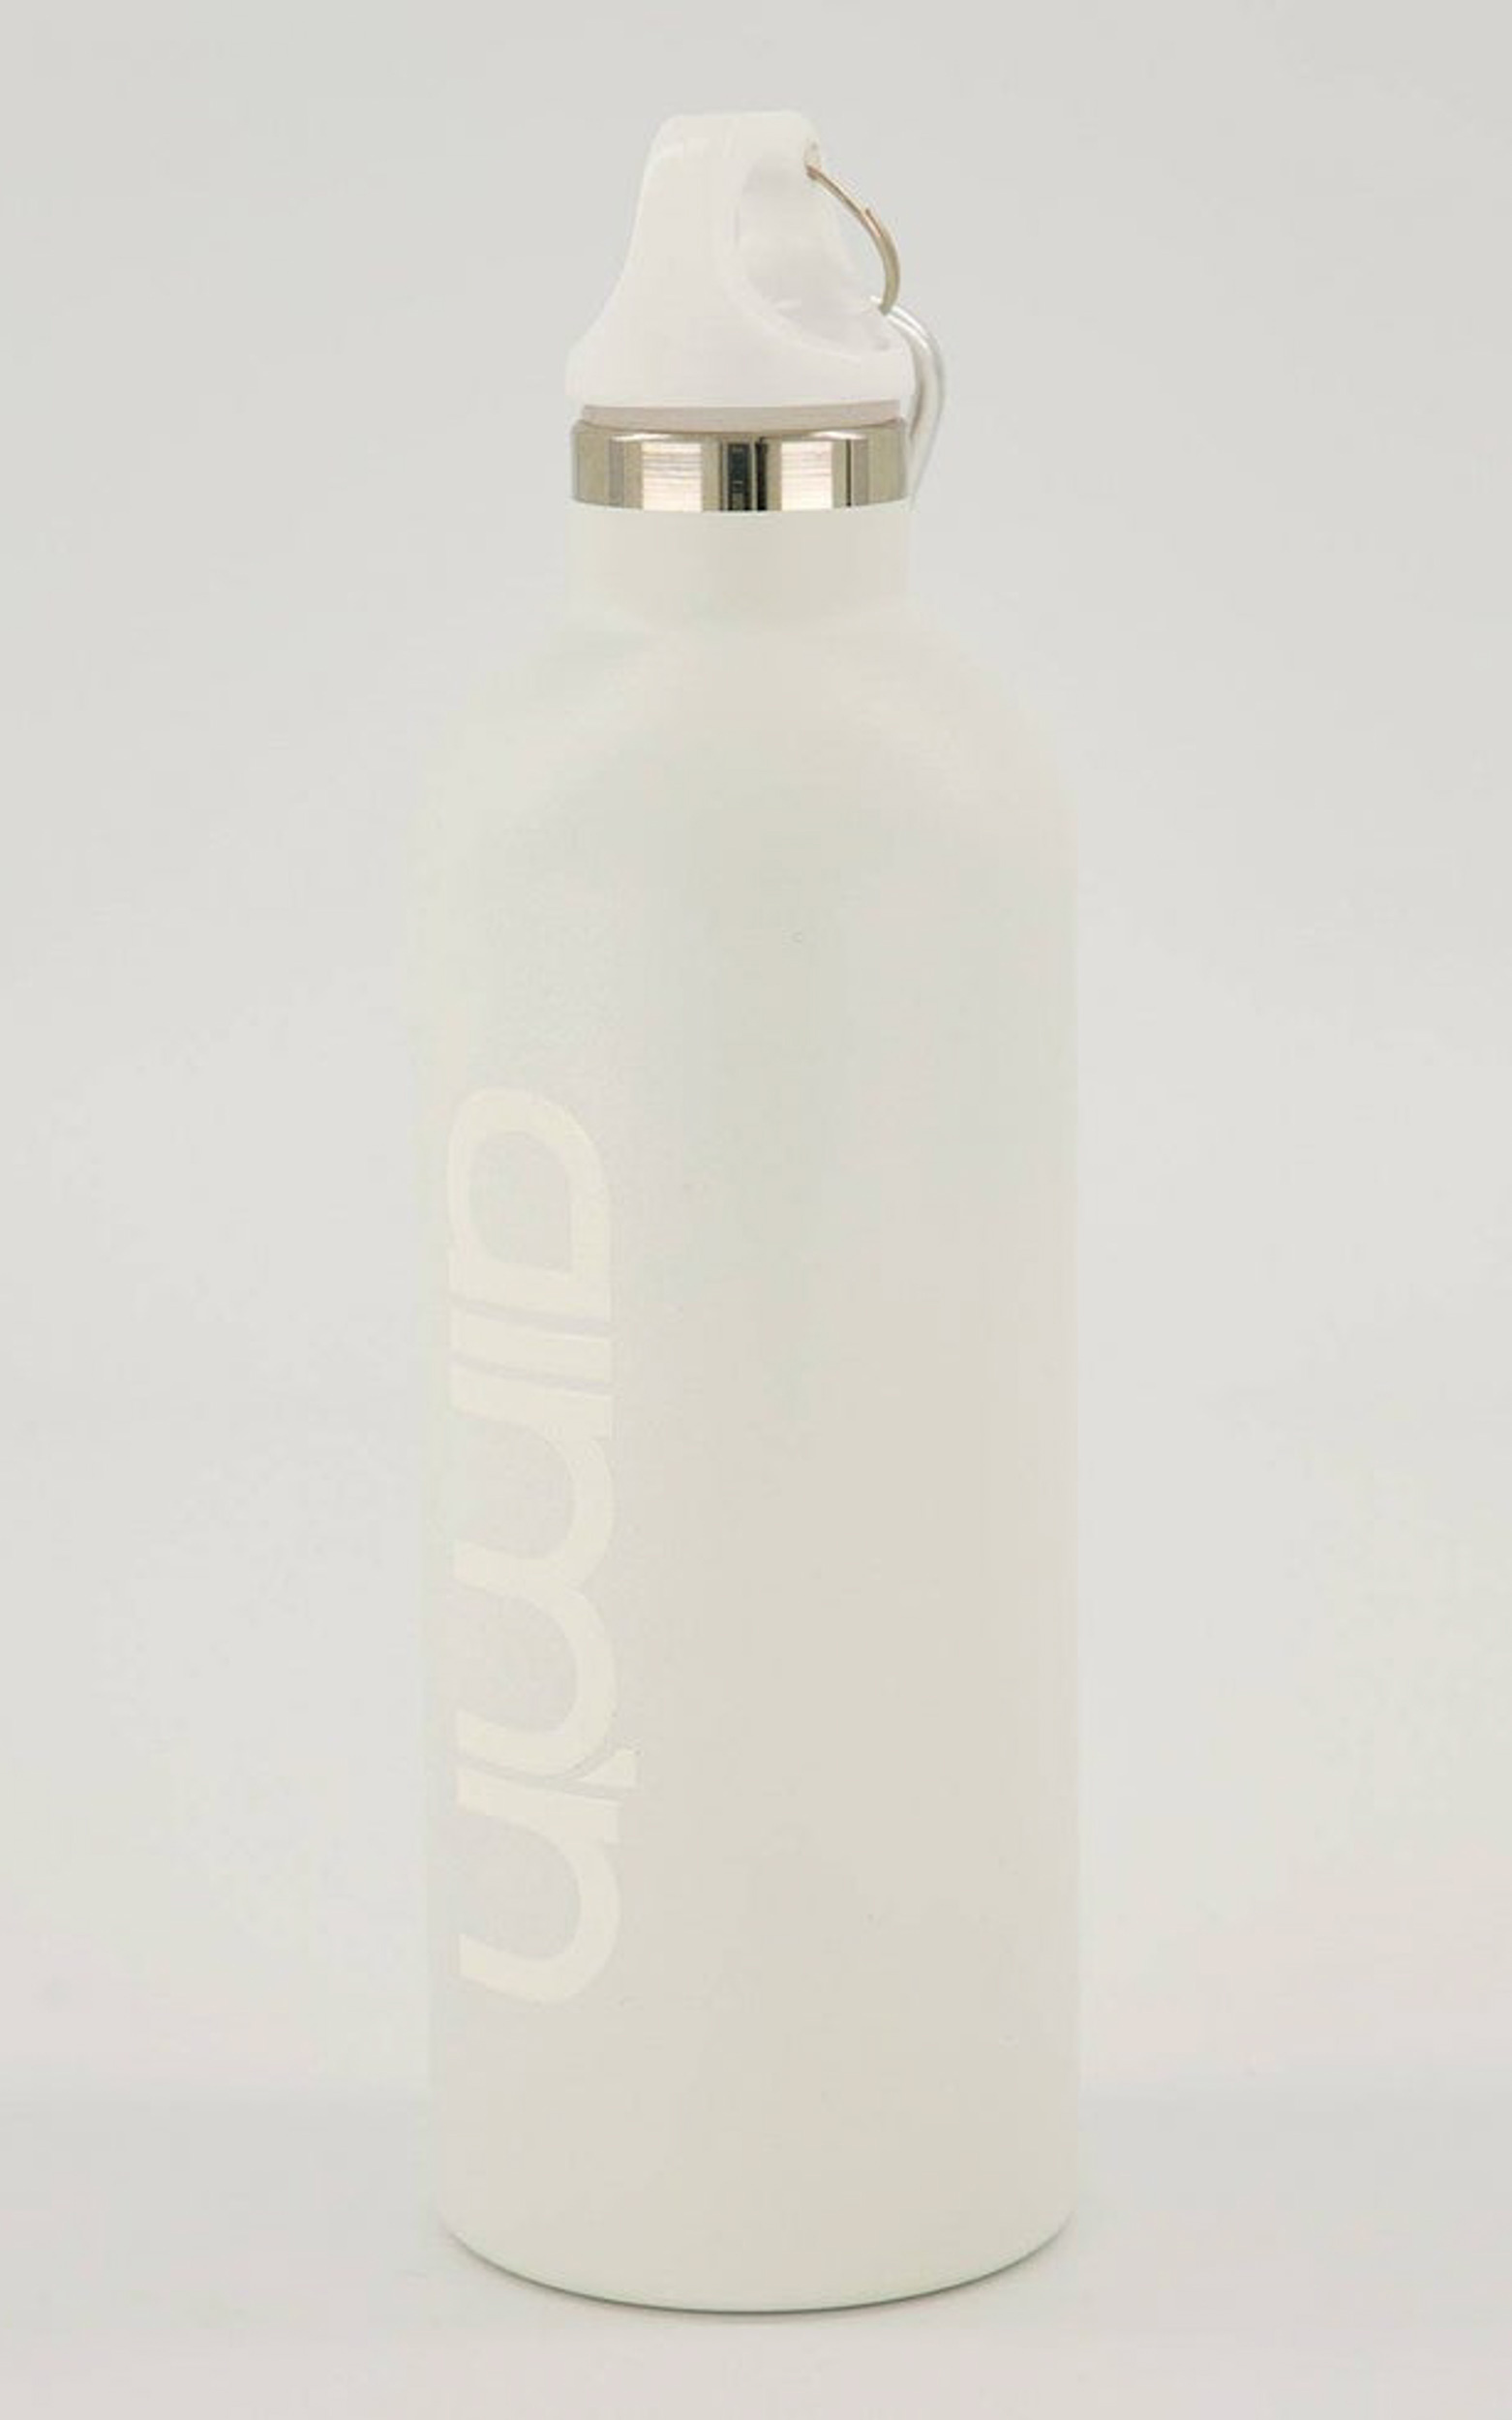 Aim'n - Hydrate Water Bottle in White - NoSize, WHT1, hi-res image number null